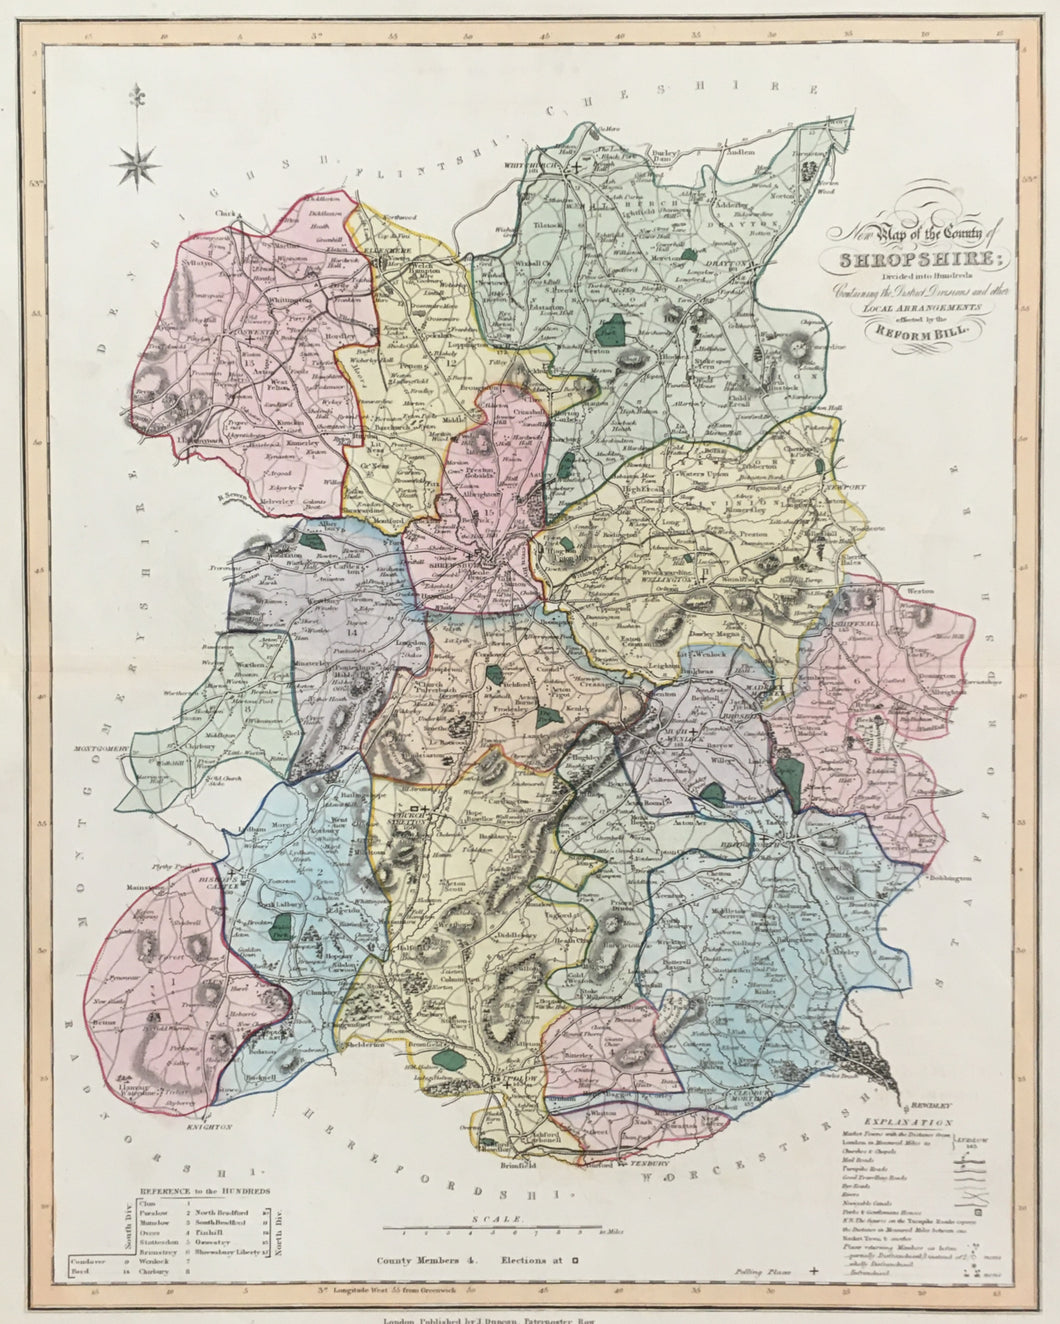 Ebden, William “New Map of the County of Shropshire.”